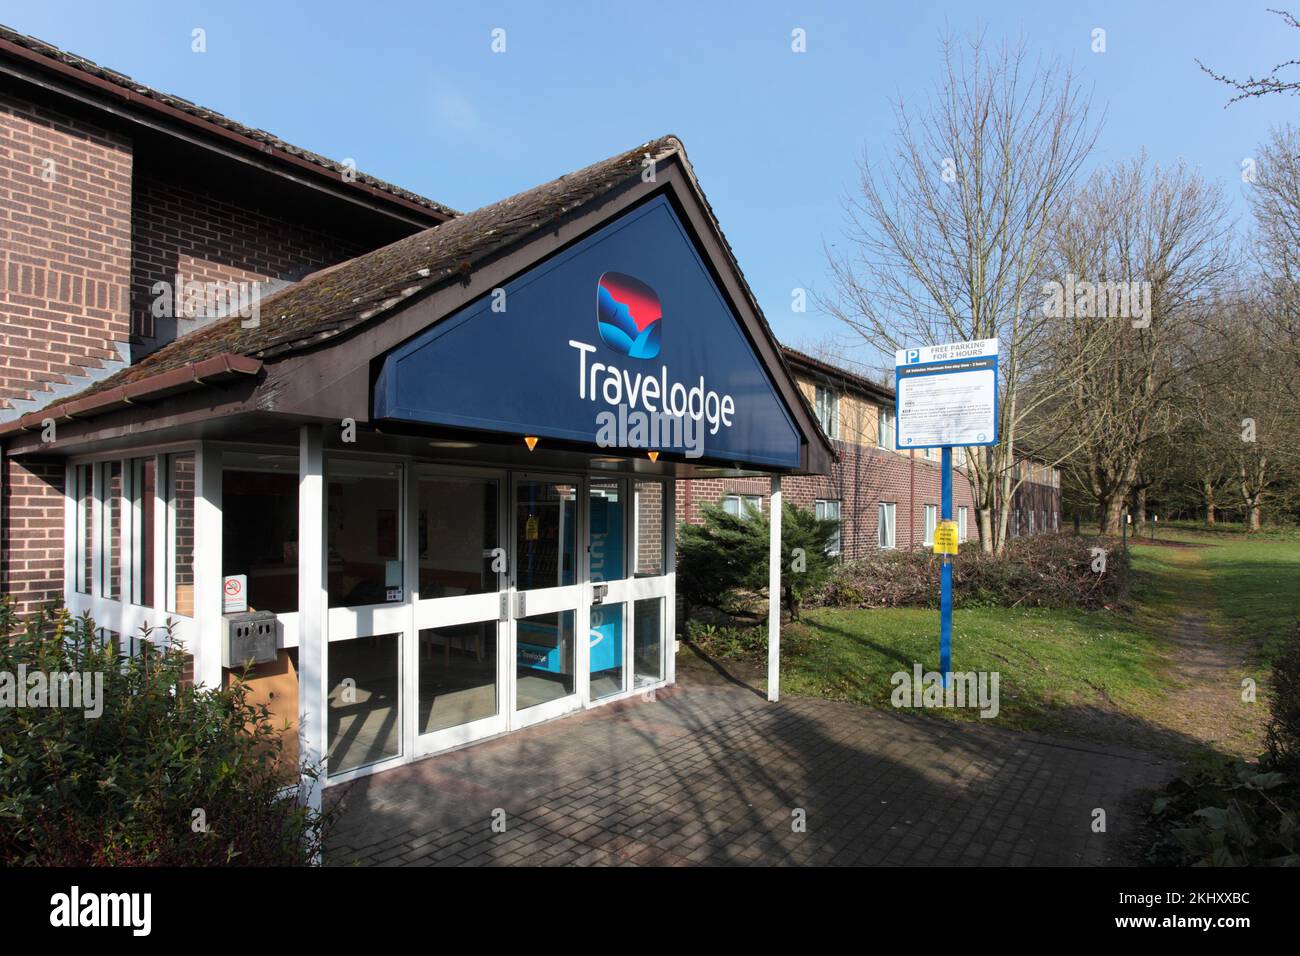 Travelodge, Moto services, M4 Leigh Delamere, eastbound, SN14 6LB Stock Photo